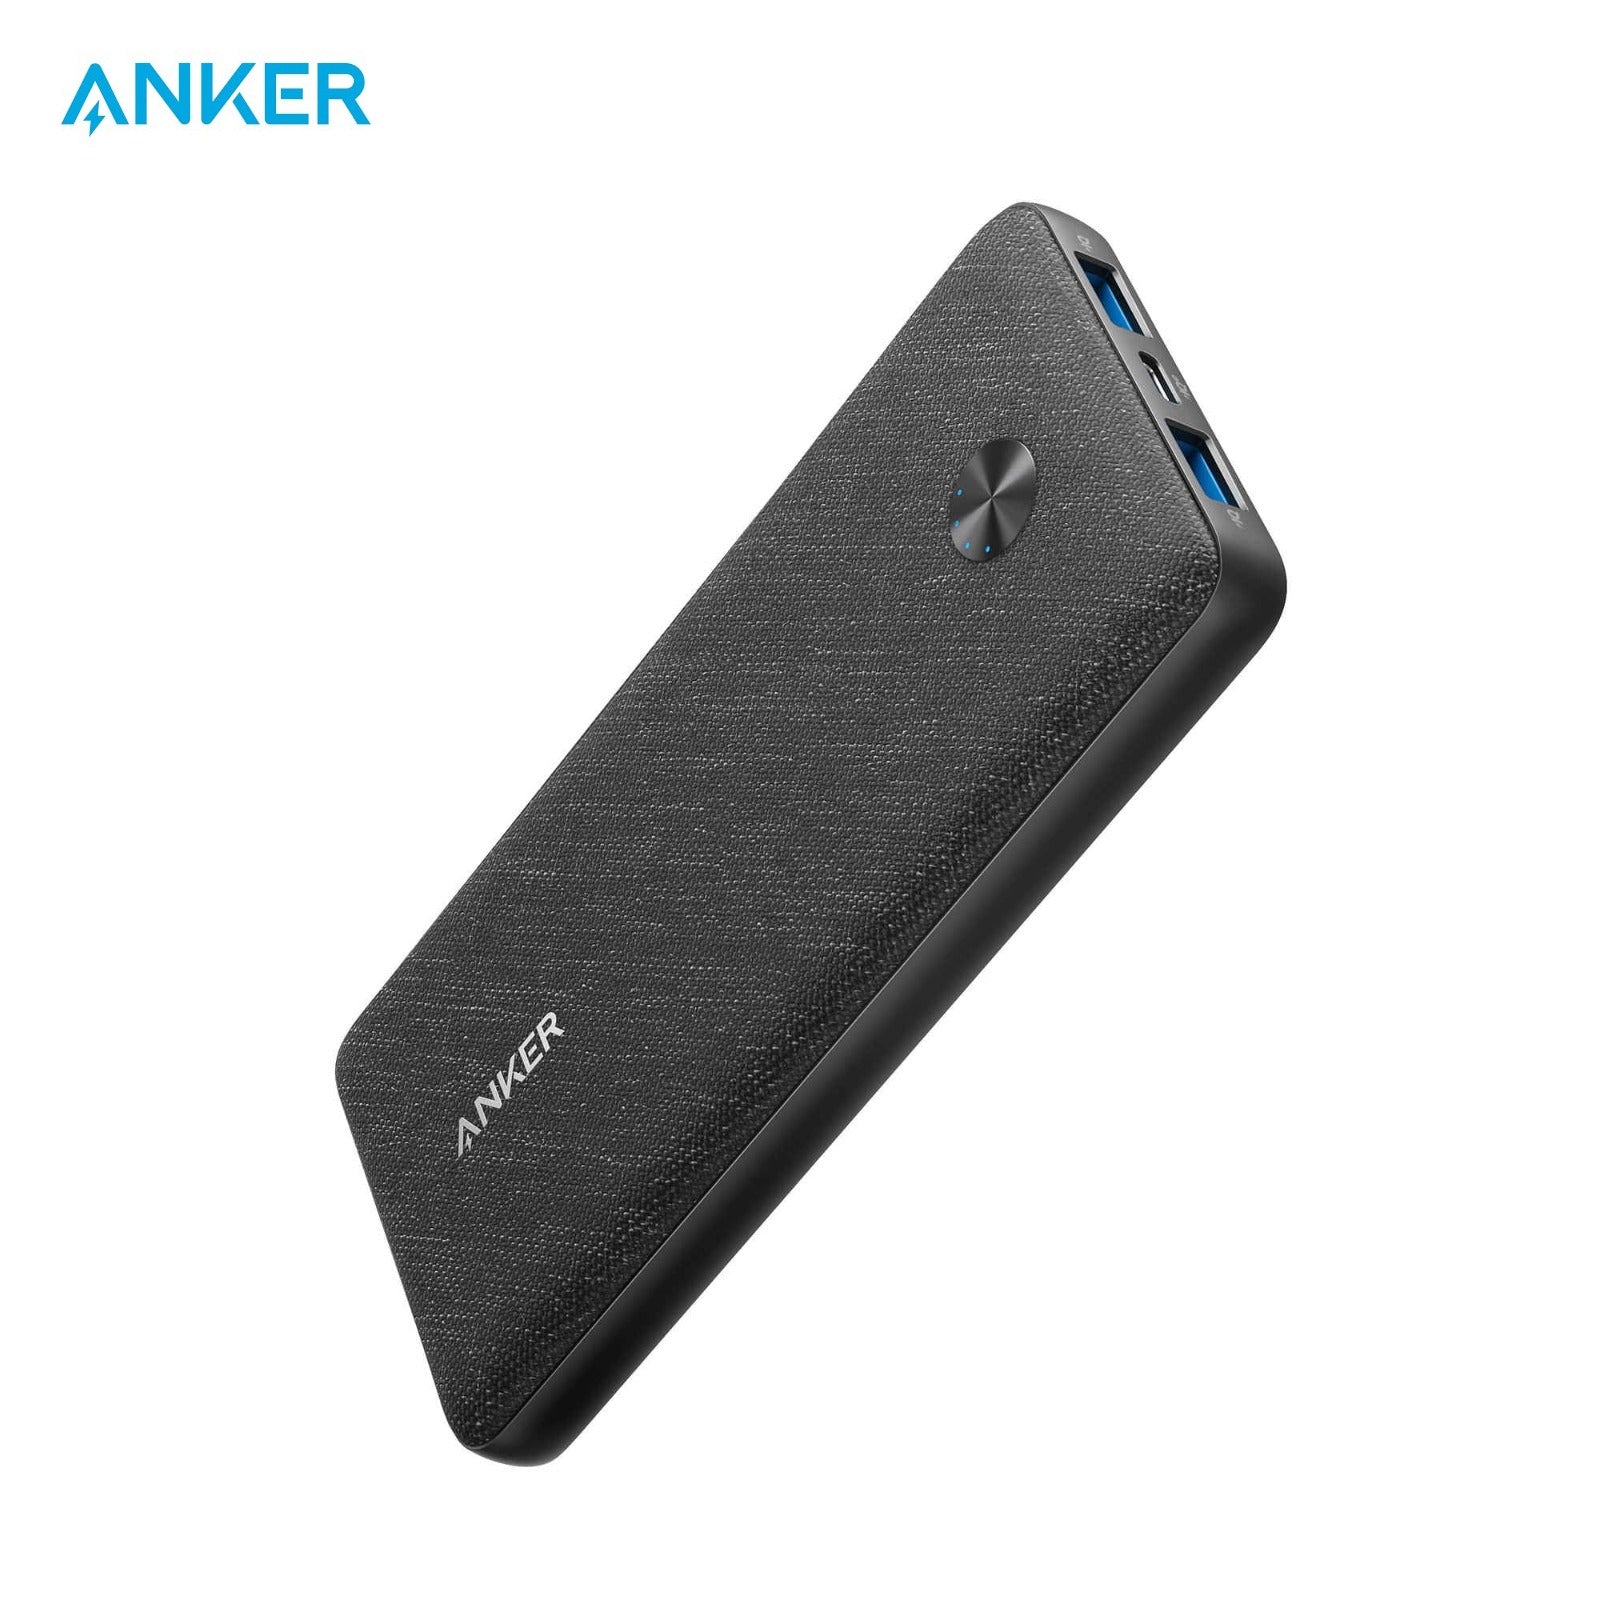 Anker PowerCore 10000mAh Power Bank A1248H11  in black color